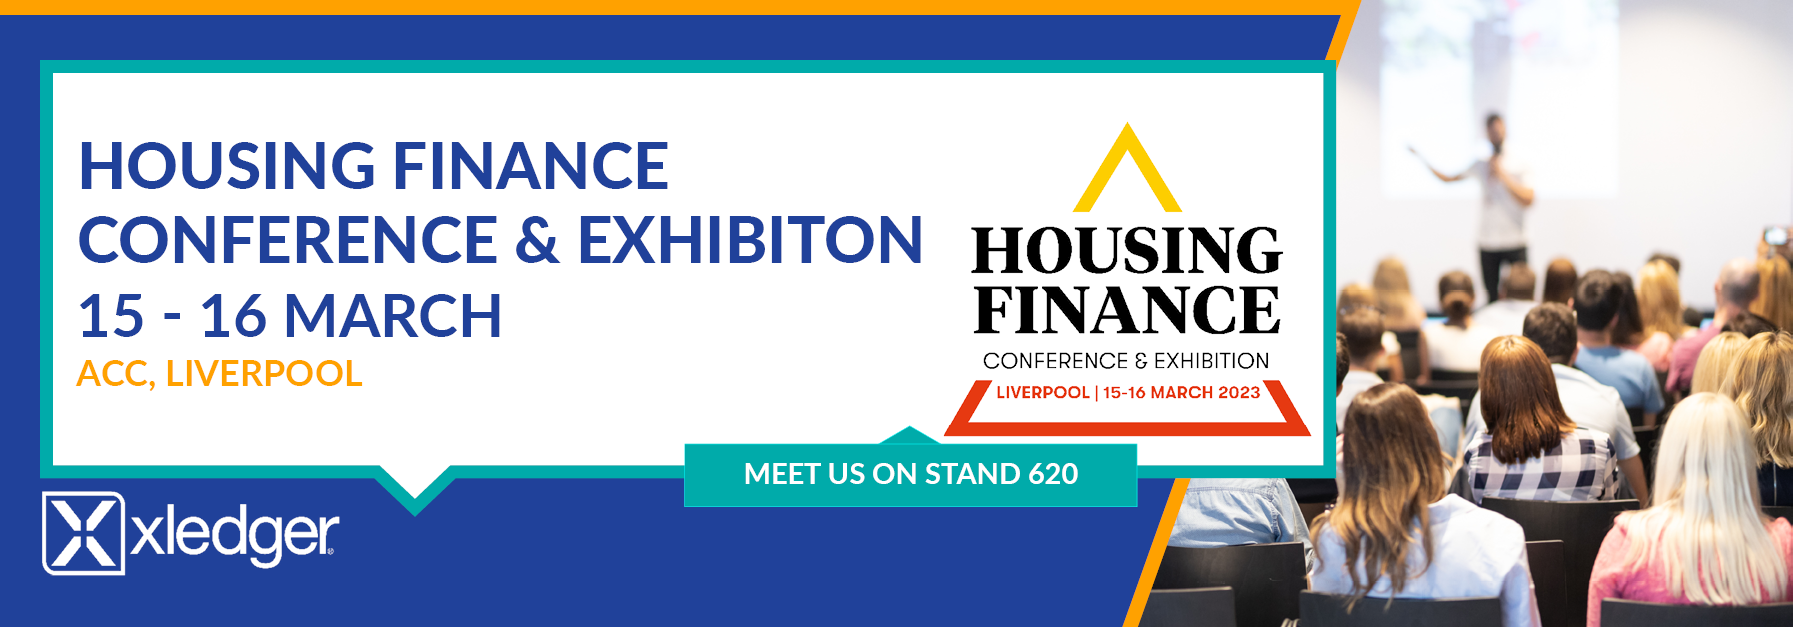 Housing Finance Conference and Exhibition